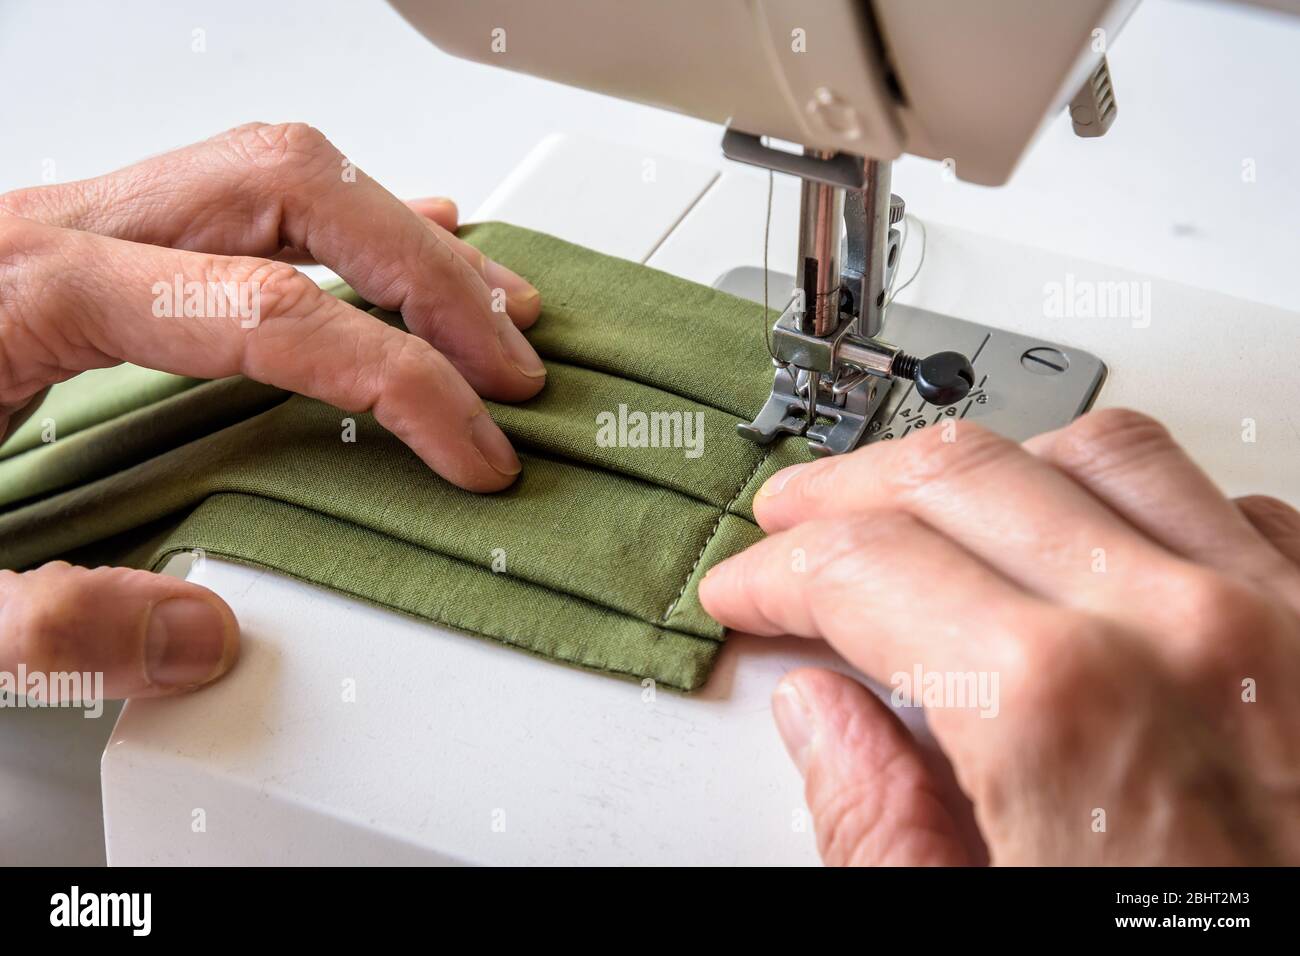 Close-up view on the hands of a woman sewing homemade reusable cloth face coverings in green cotton fabric on a sewing machine. Stock Photo